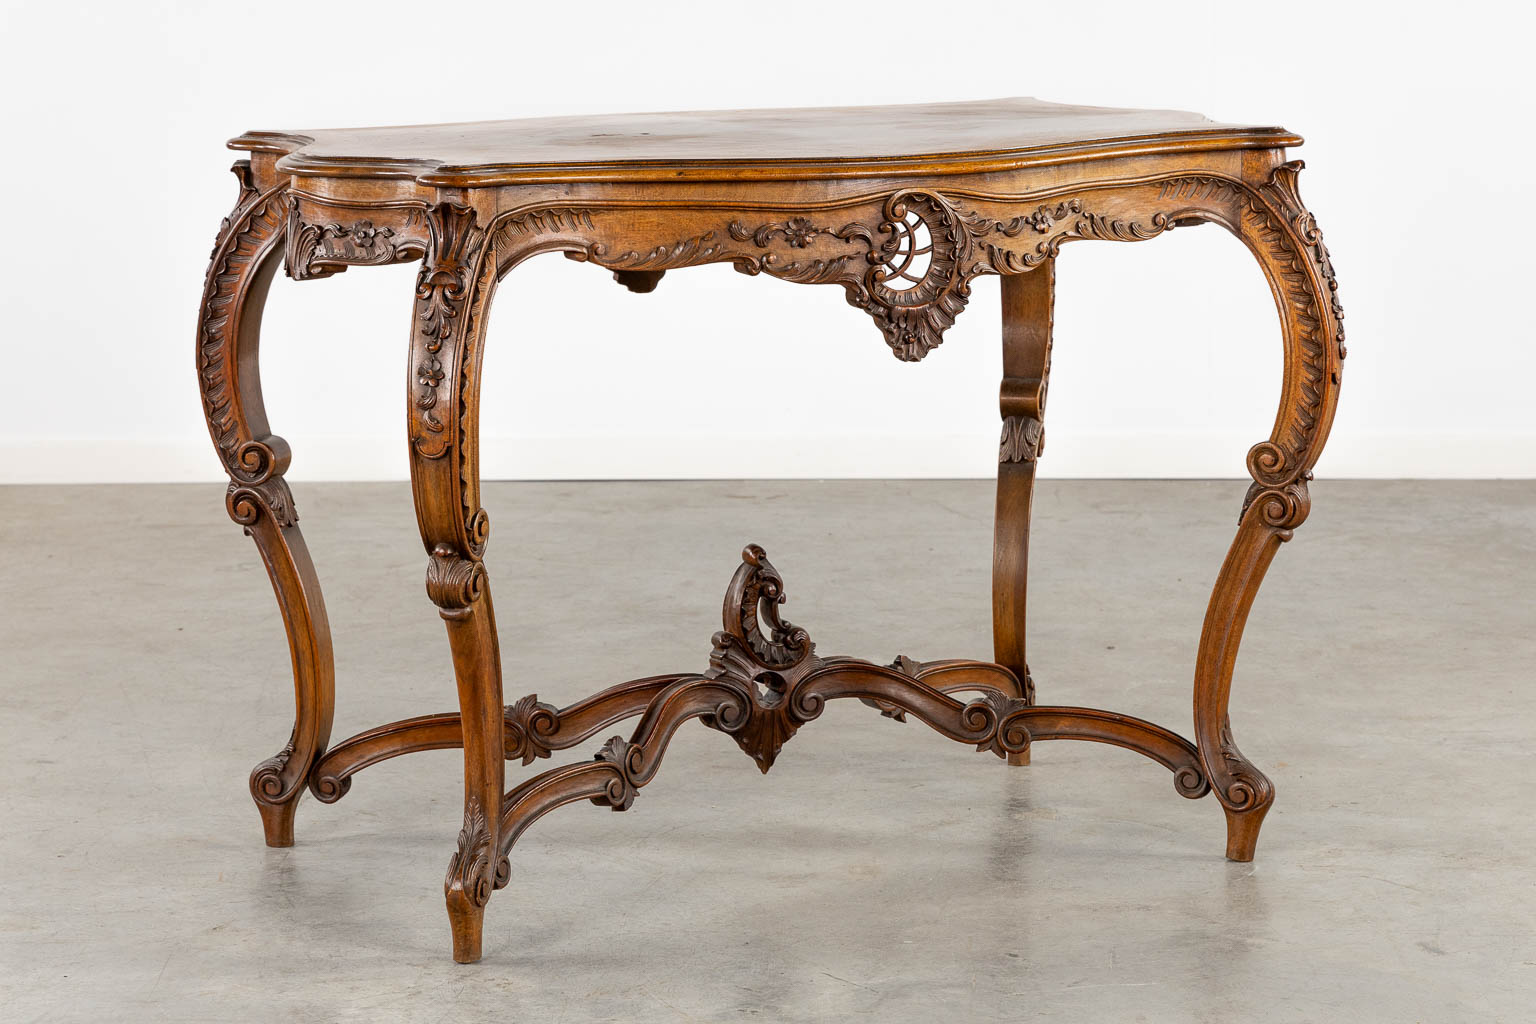 An 8-piece salon suite, sculptured wood in Louis XV style. Circa 1900. (L:67 x W:135 x H:103 cm) - Image 25 of 33